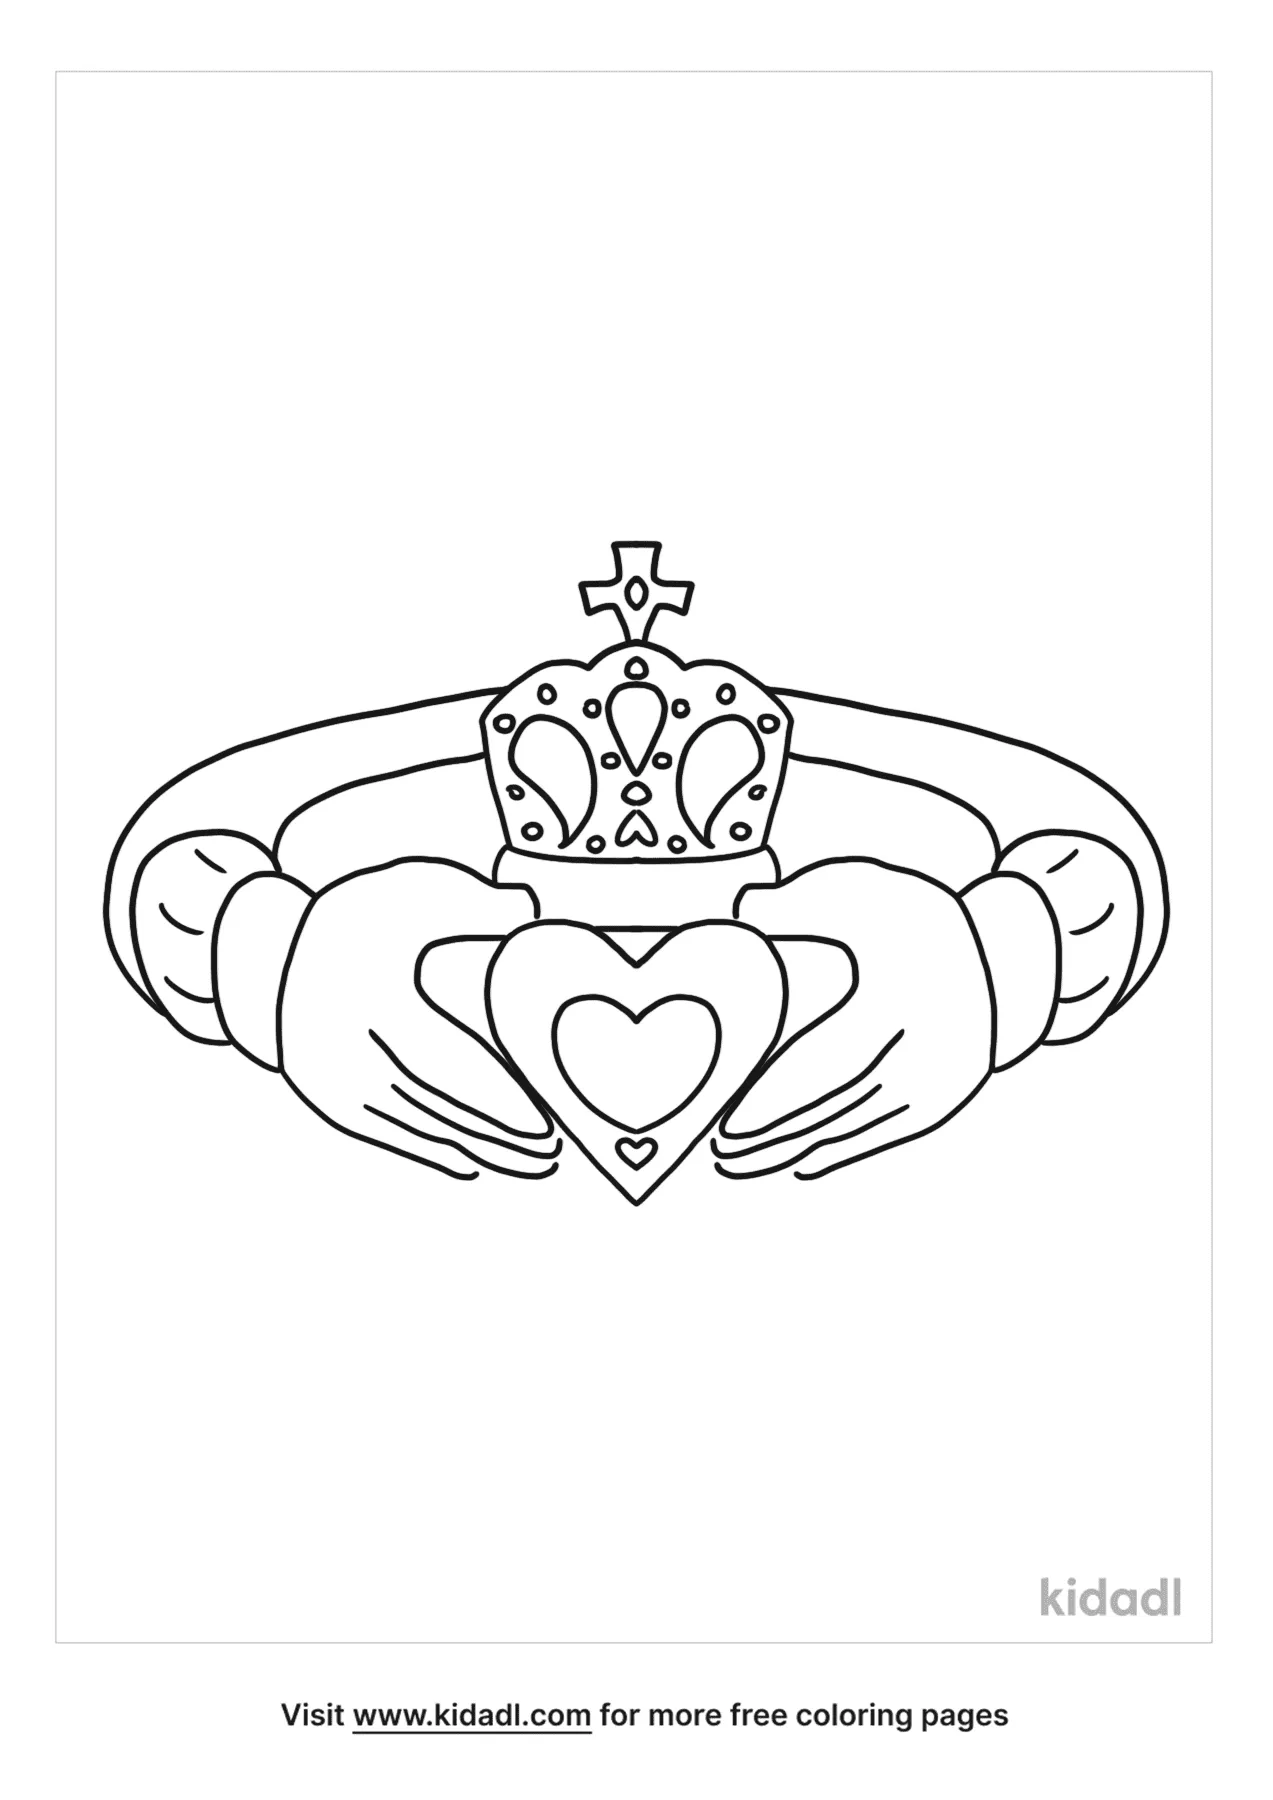 Claddagh Ring Coloring Page